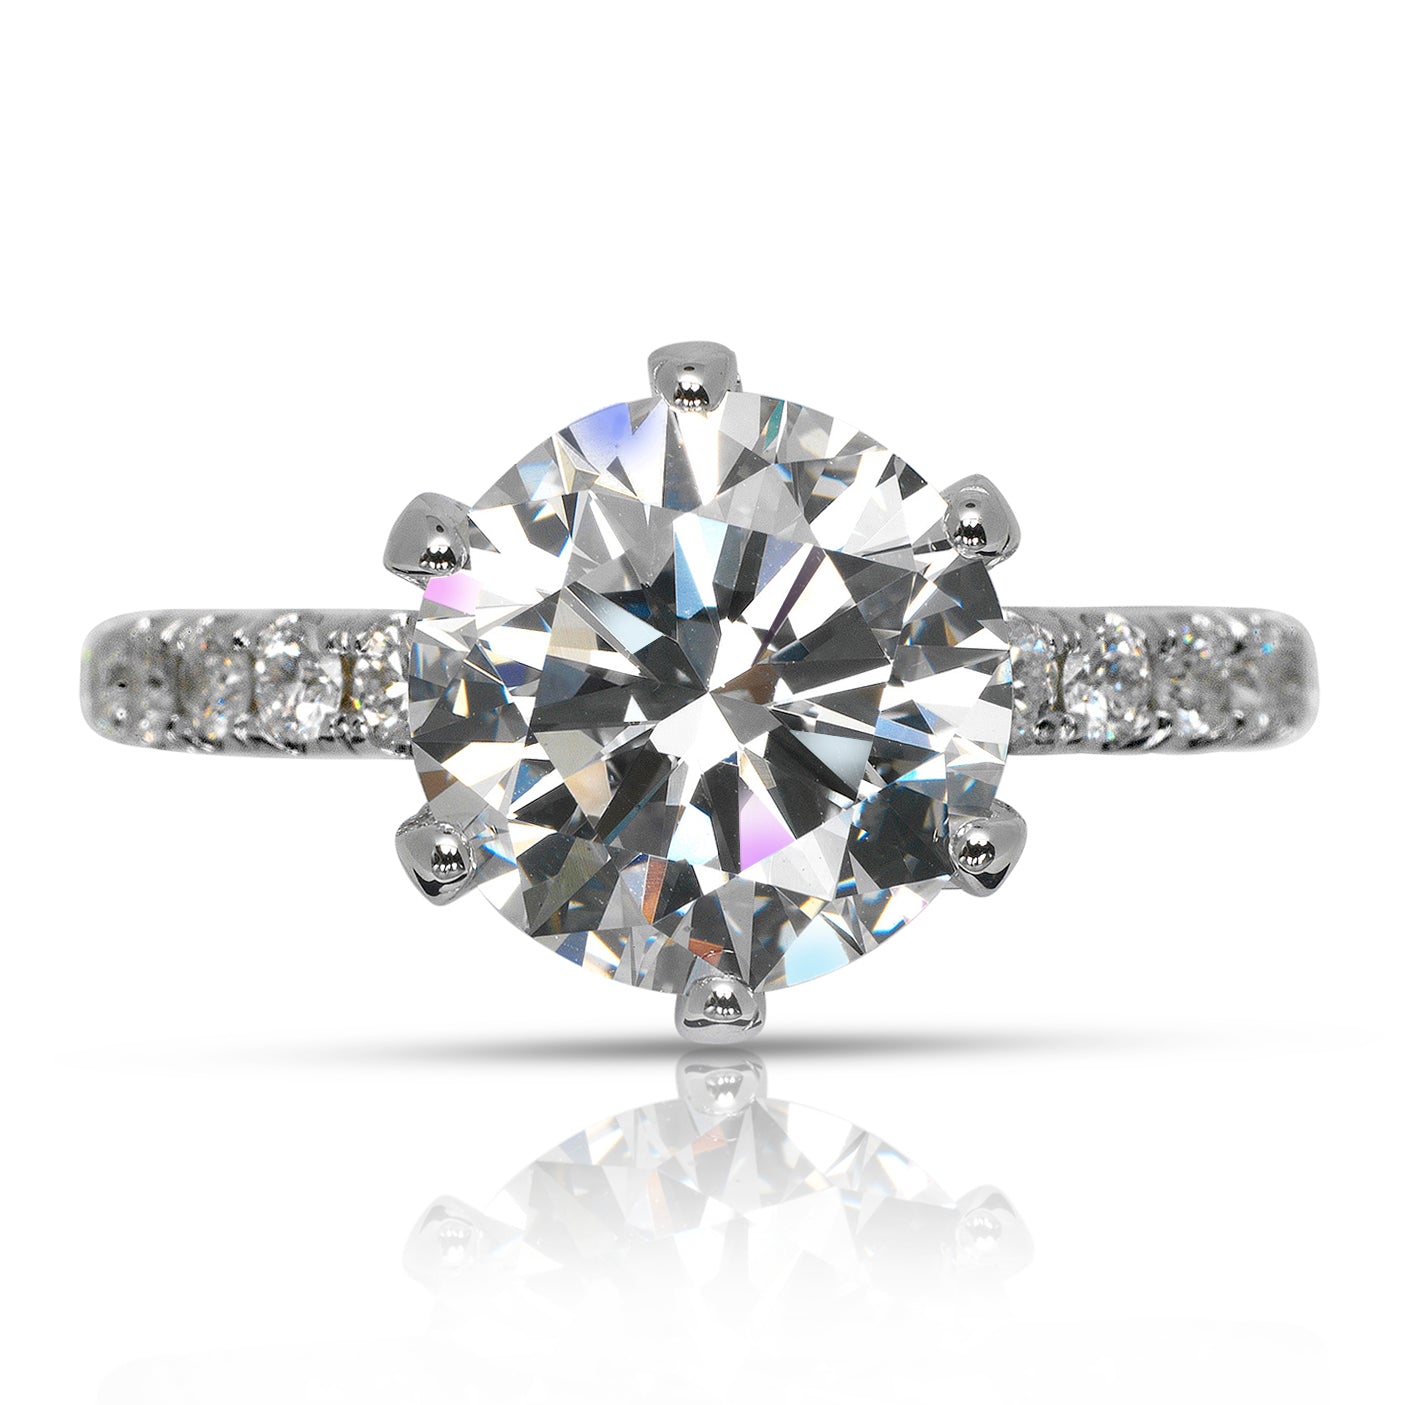 Keyzar · How to Score a High-Key Boujee 4ct Diamond Ring for Less Living  that 4ct Diamond Ring Fantasy for Way Less Than 20k 4ct Diamond Ring on a  Budget? We Love